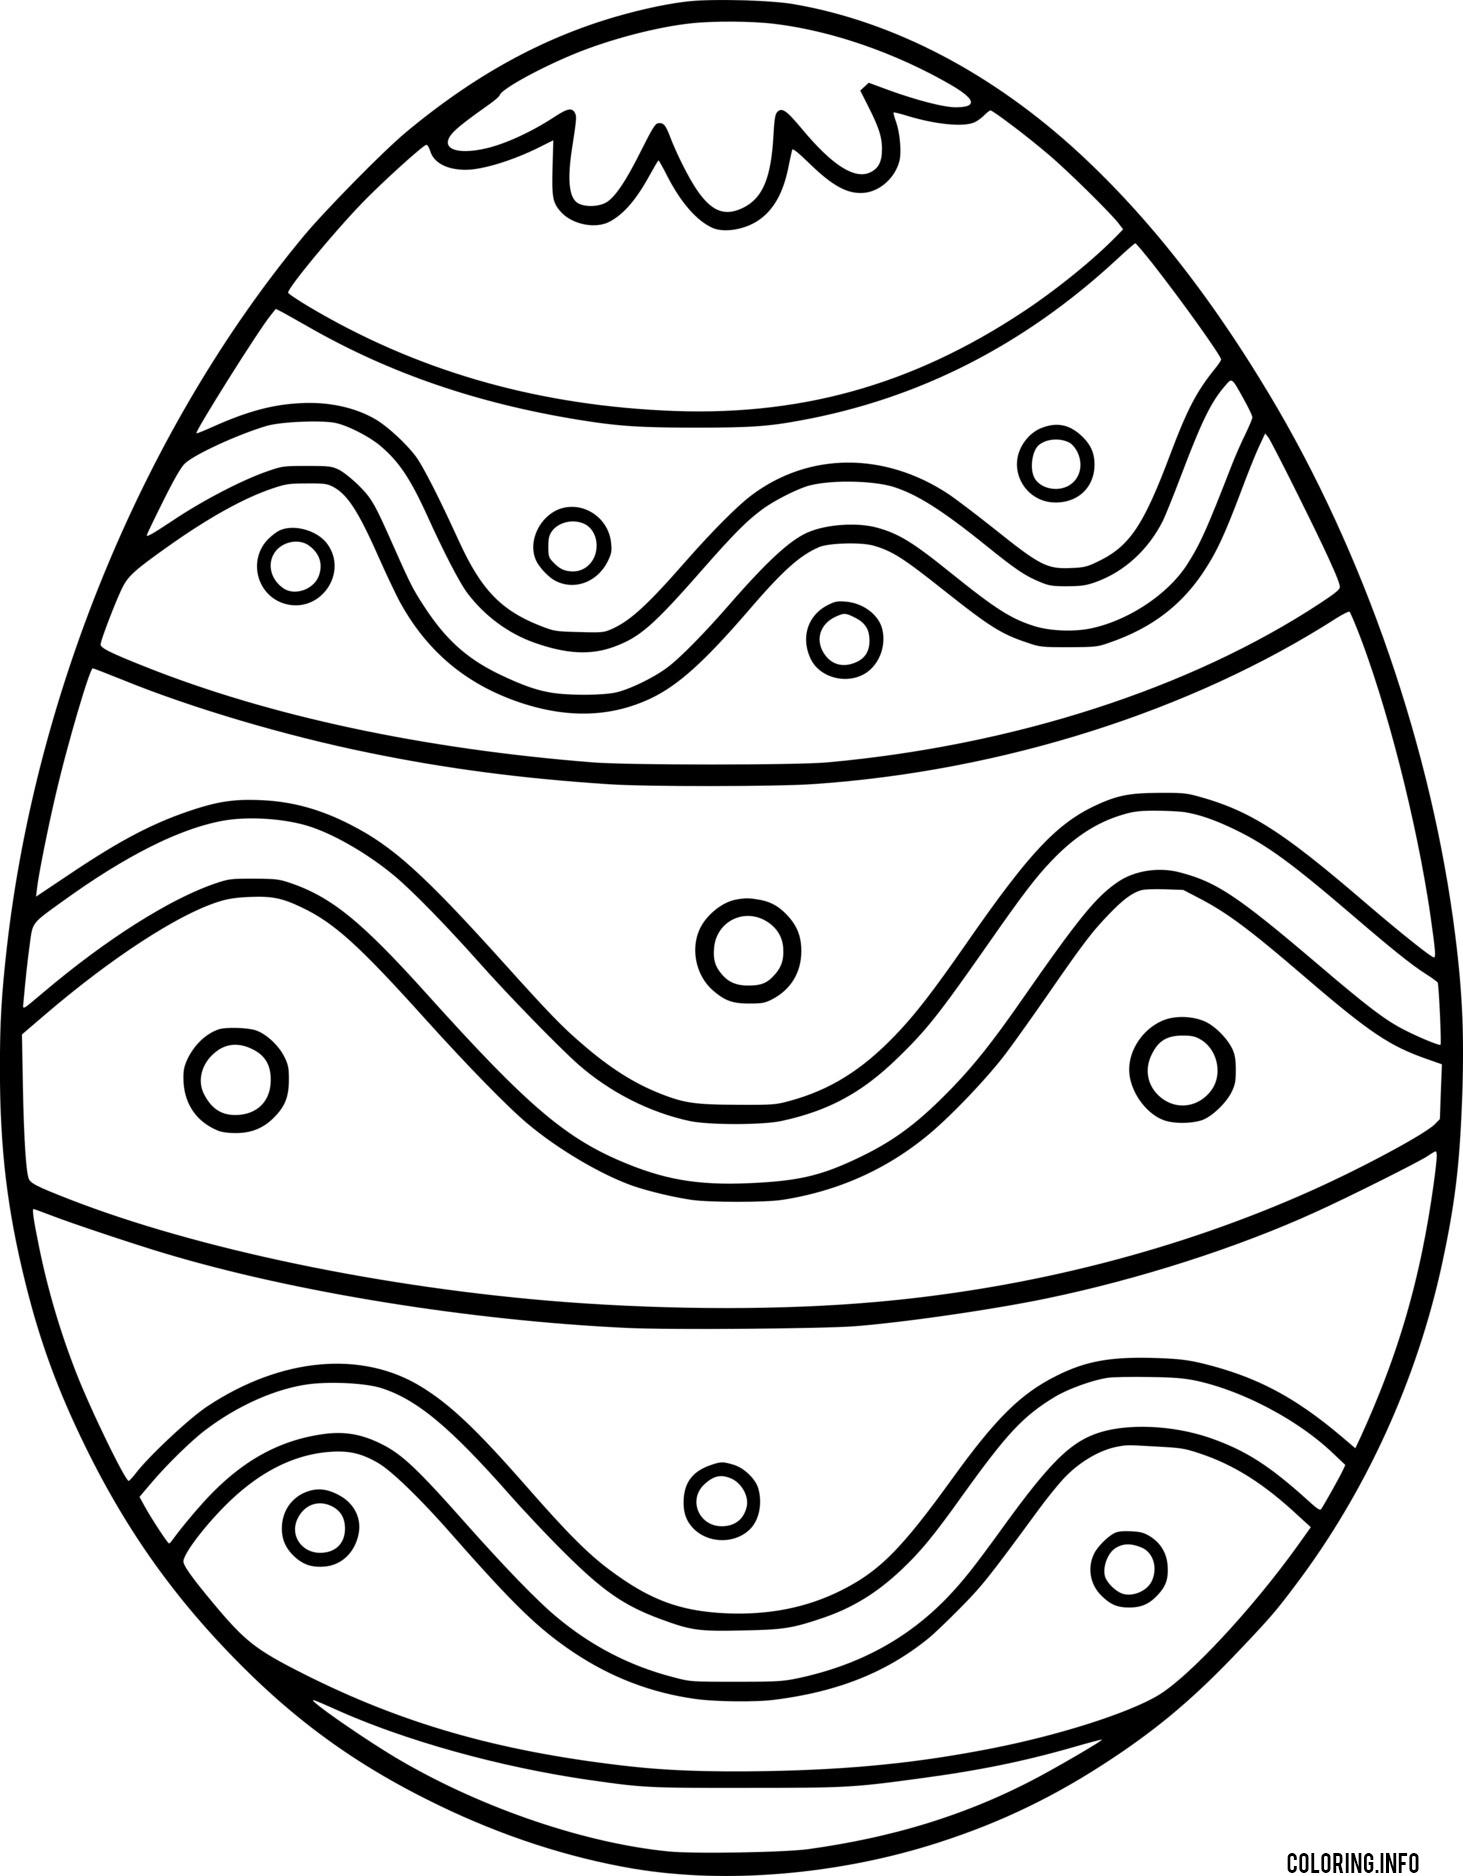 Circle And Wave Line Pattern Easter Egg coloring